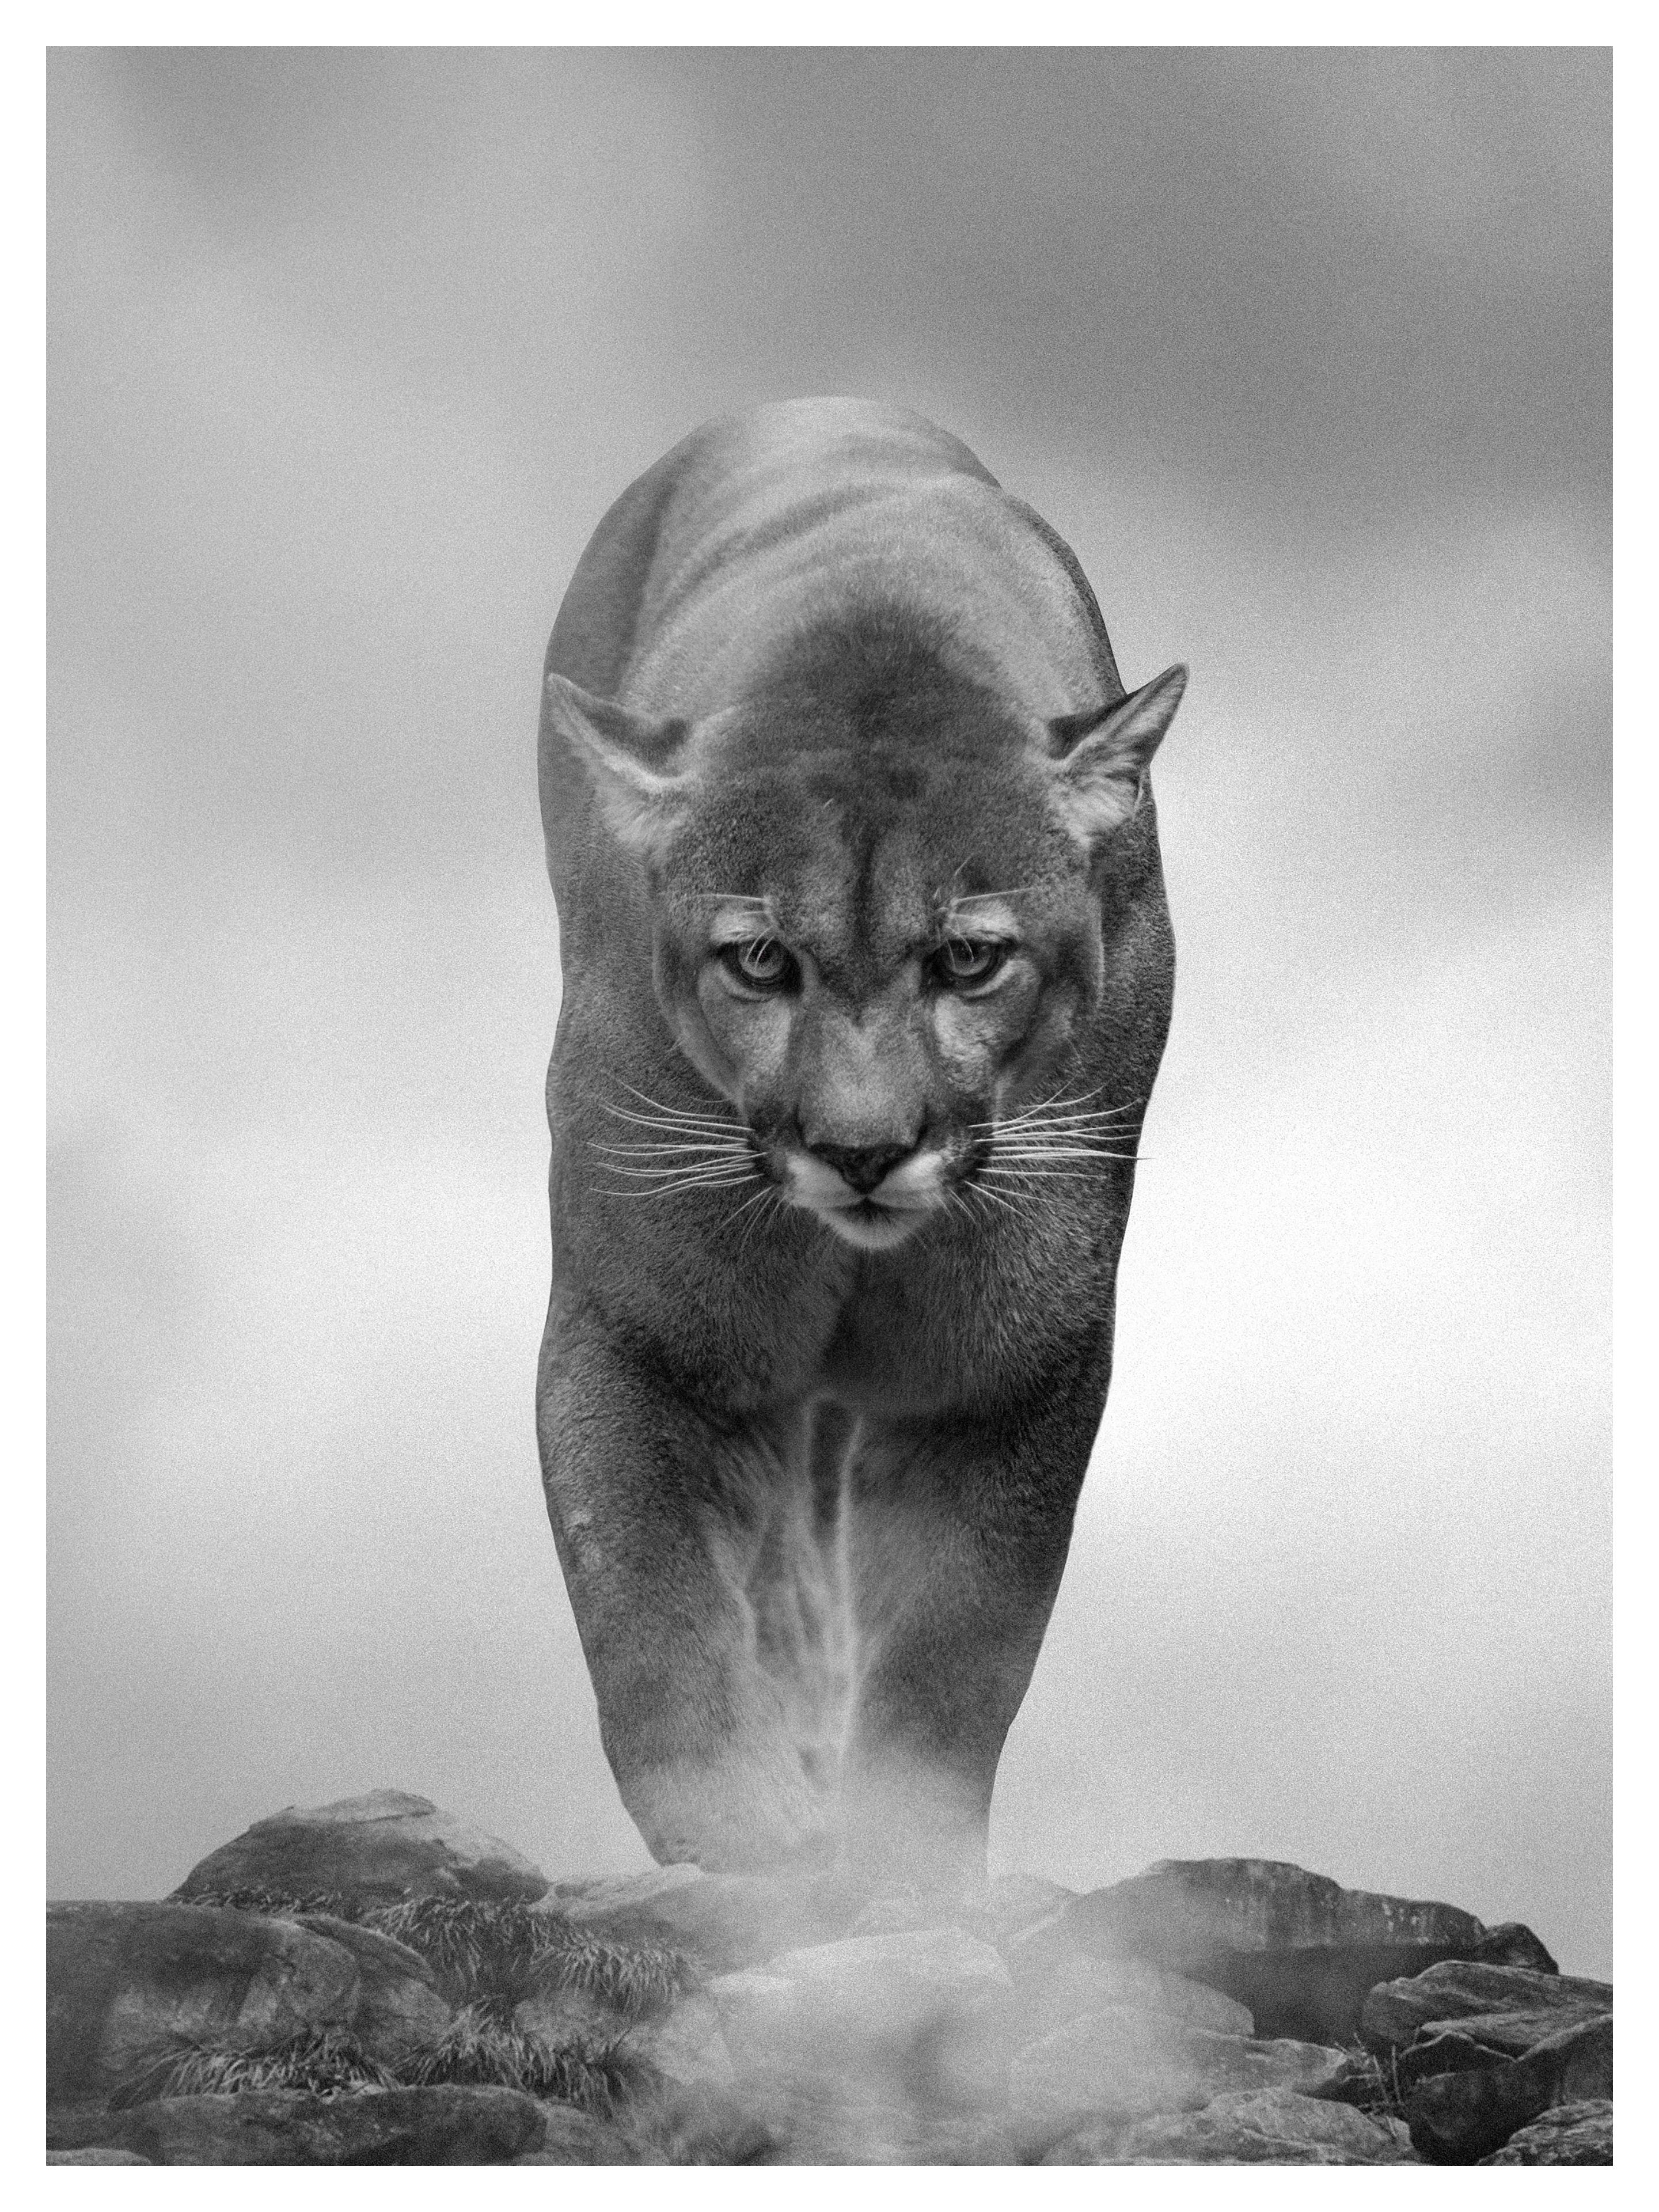 Shane Russeck Animal Print - "King of the Mountain" 40x28 Black and White Photography, Cougar, Mountain Lion